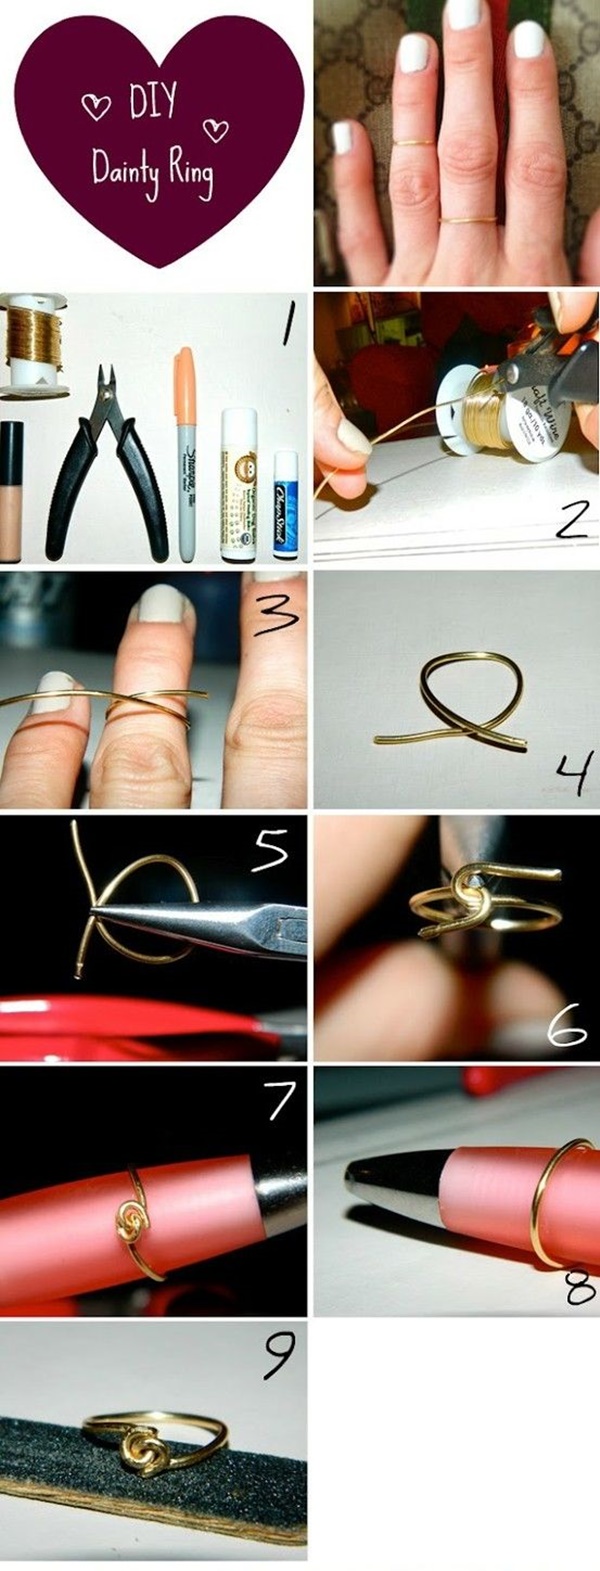 diy-knot-ring-for-your-lover-5